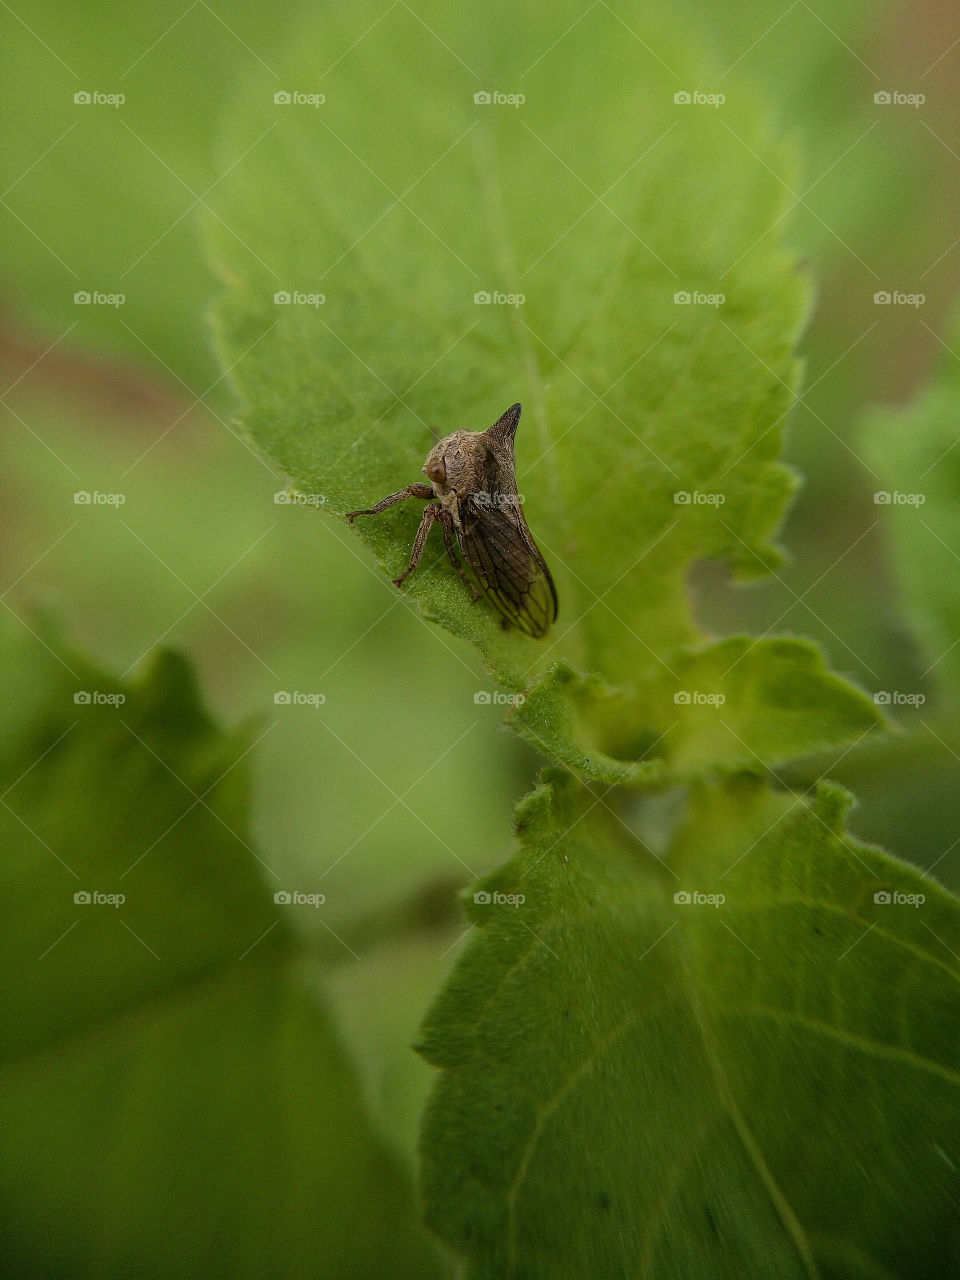 Insect on green leaf